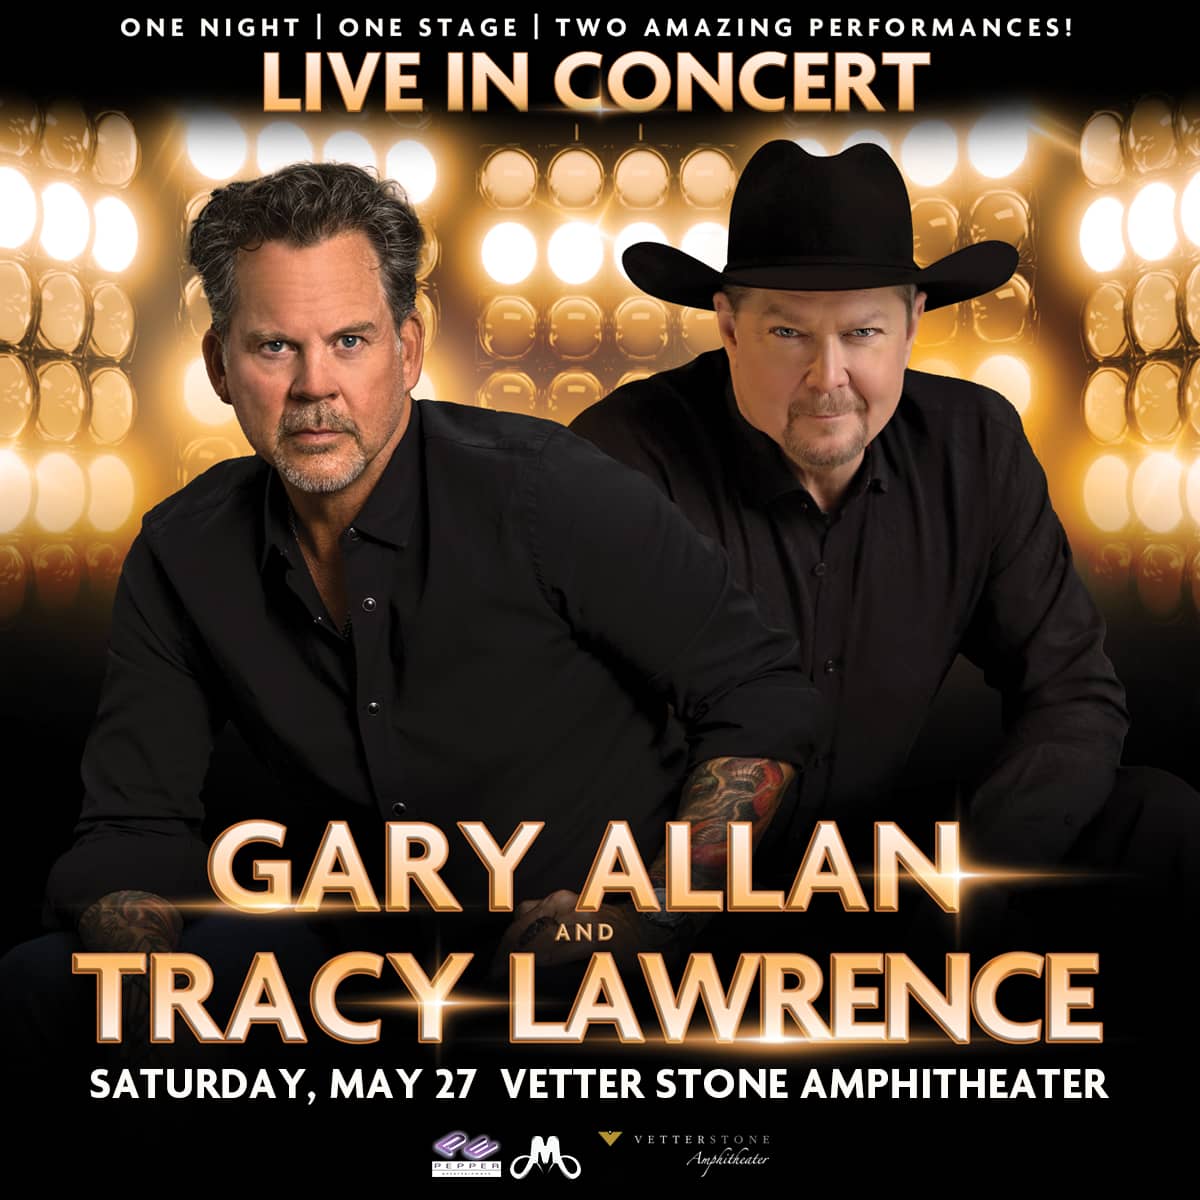 gary allan tracy lawrence tour dates